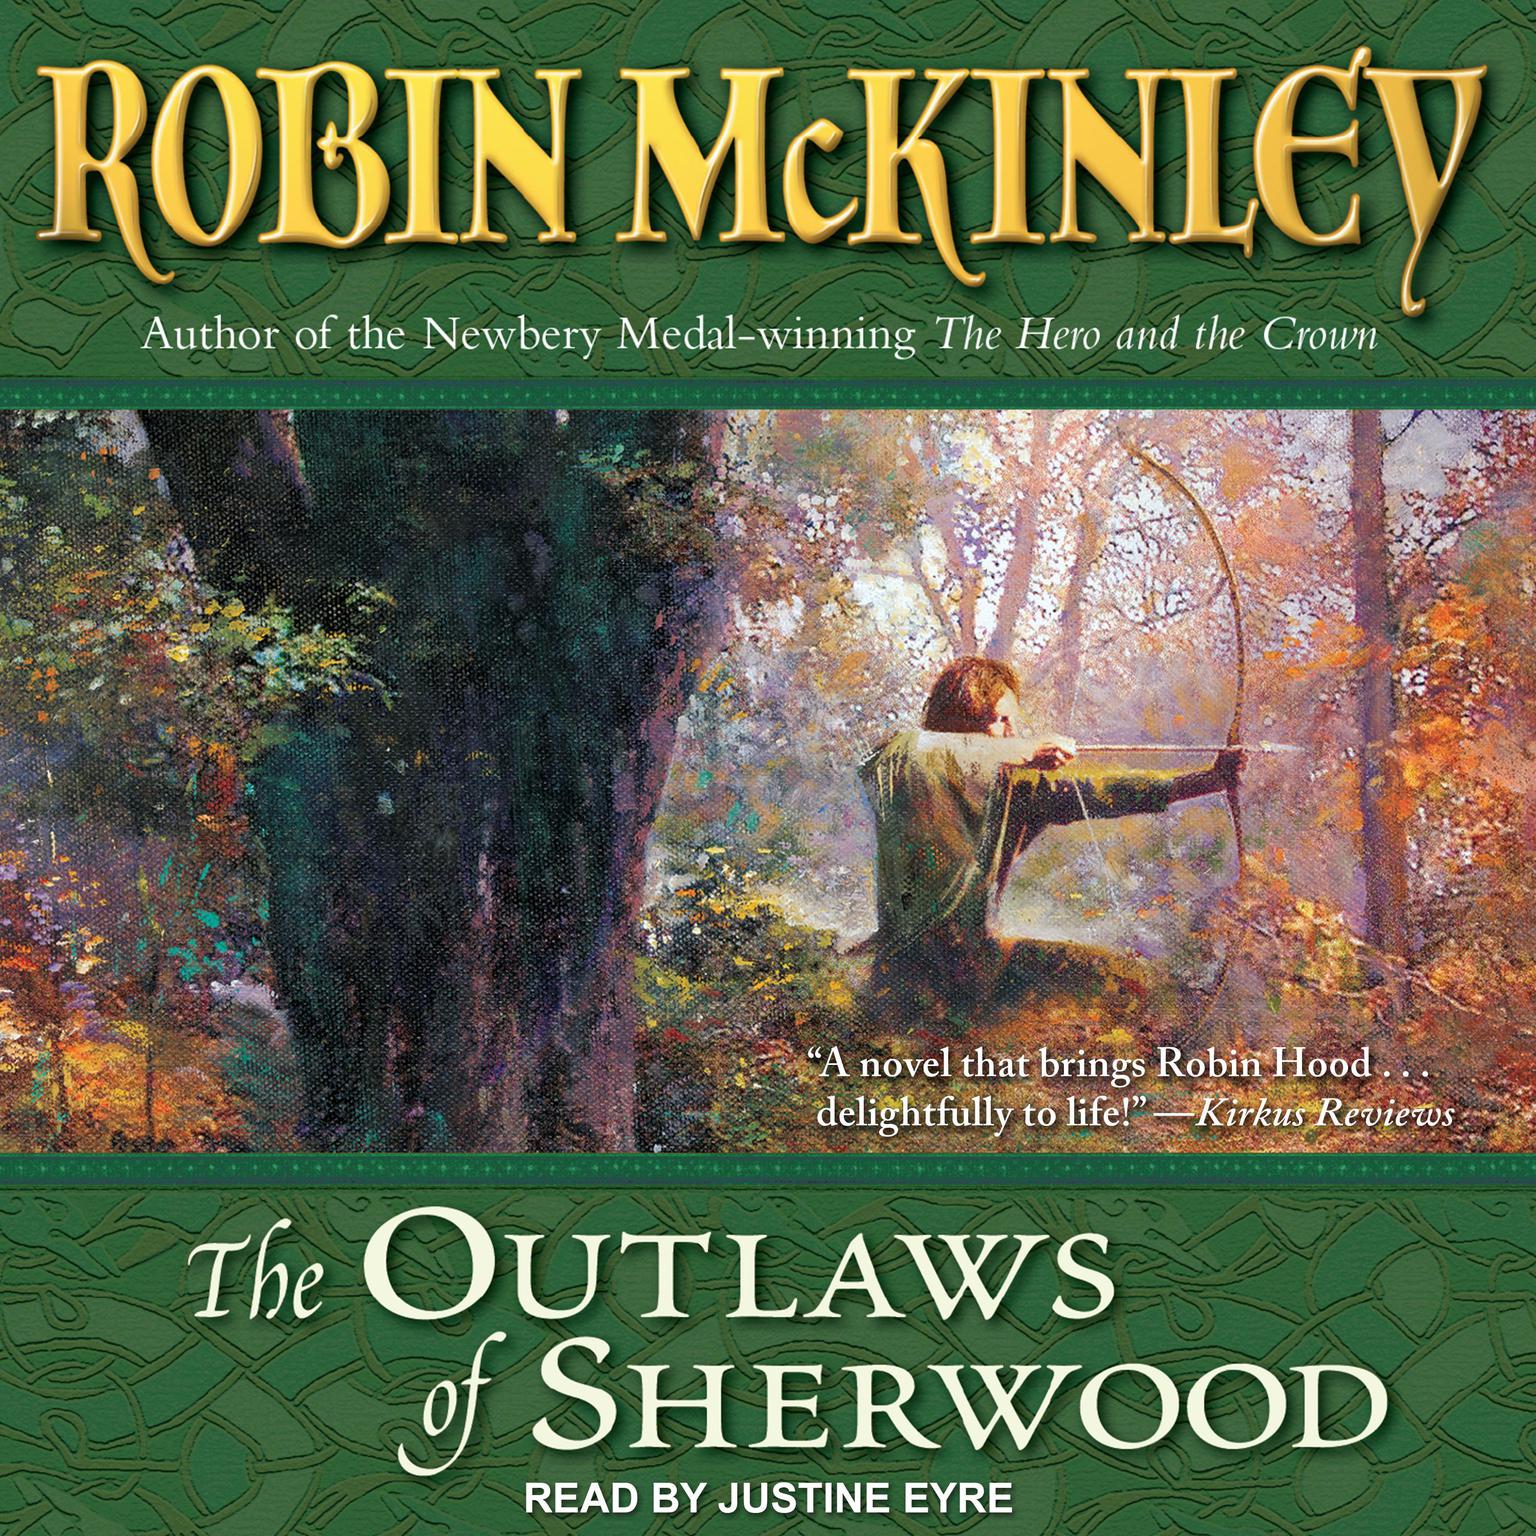 The Outlaws of Sherwood (1989, Ace)